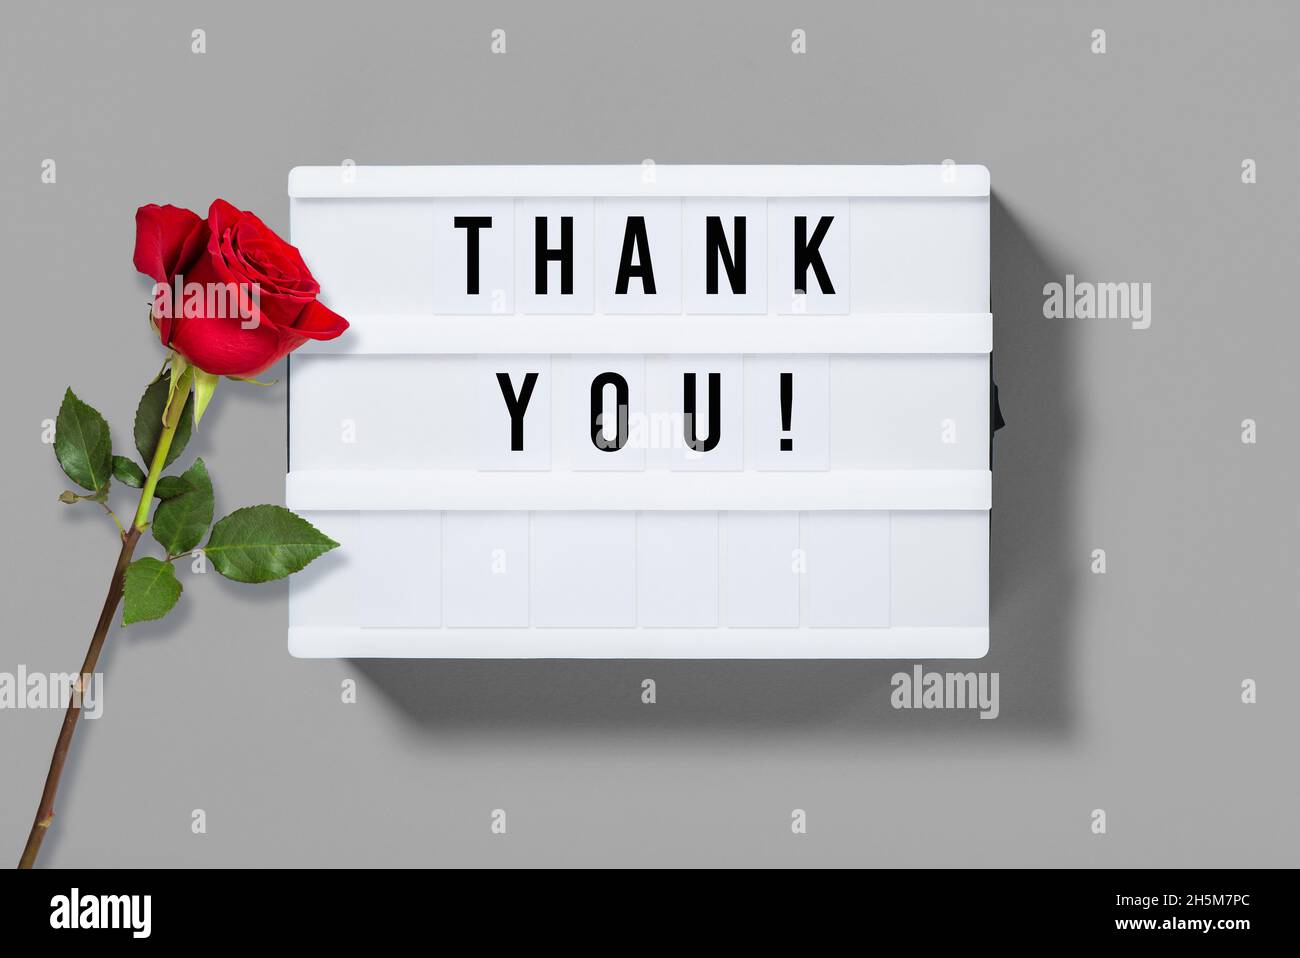 Thank You! Light box with letters and red rose flower decoration Stock Photo